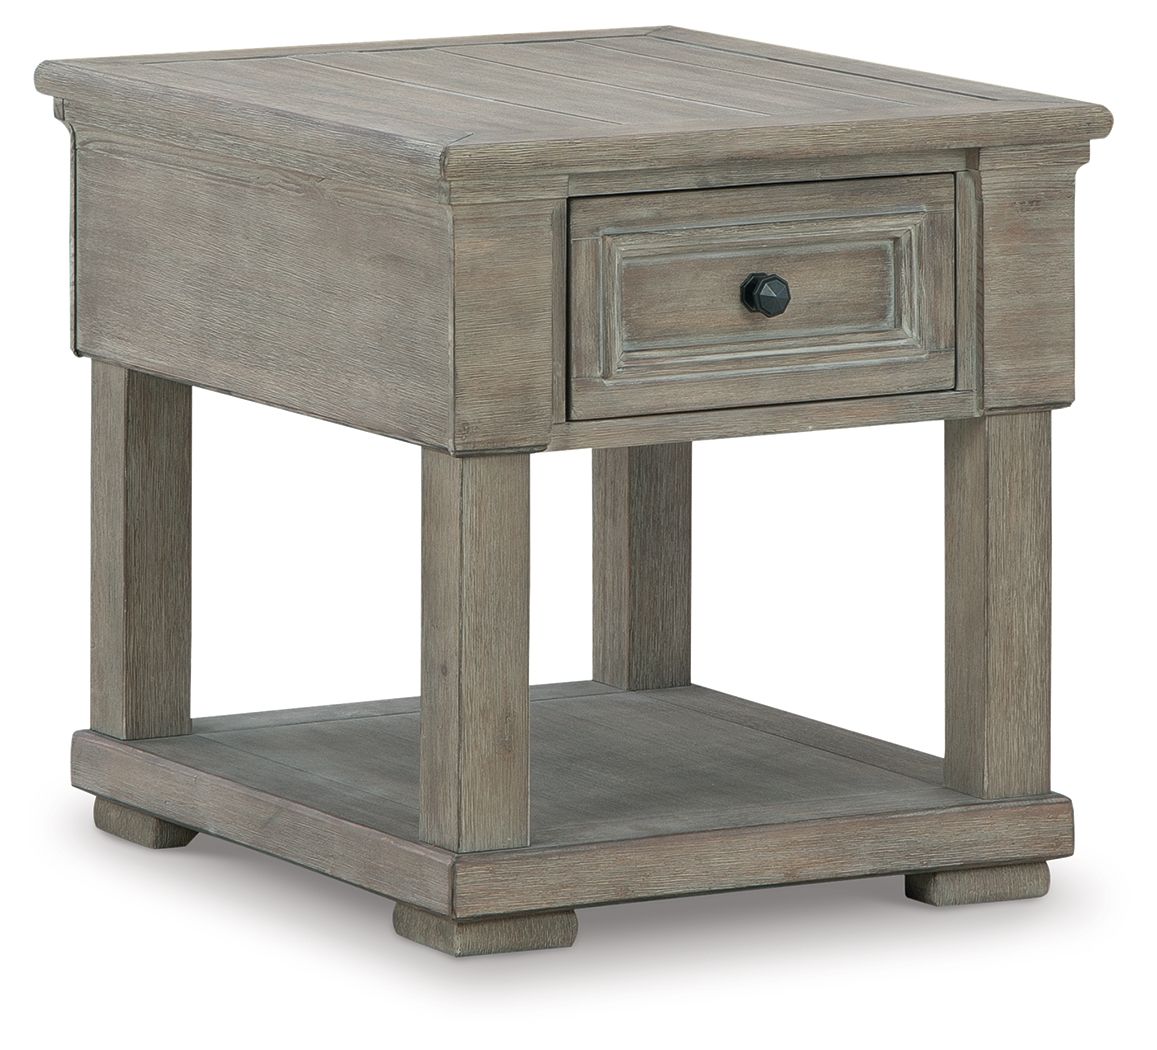 Moreshire - Bisque - Rectangular End Table Tony's Home Furnishings Furniture. Beds. Dressers. Sofas.